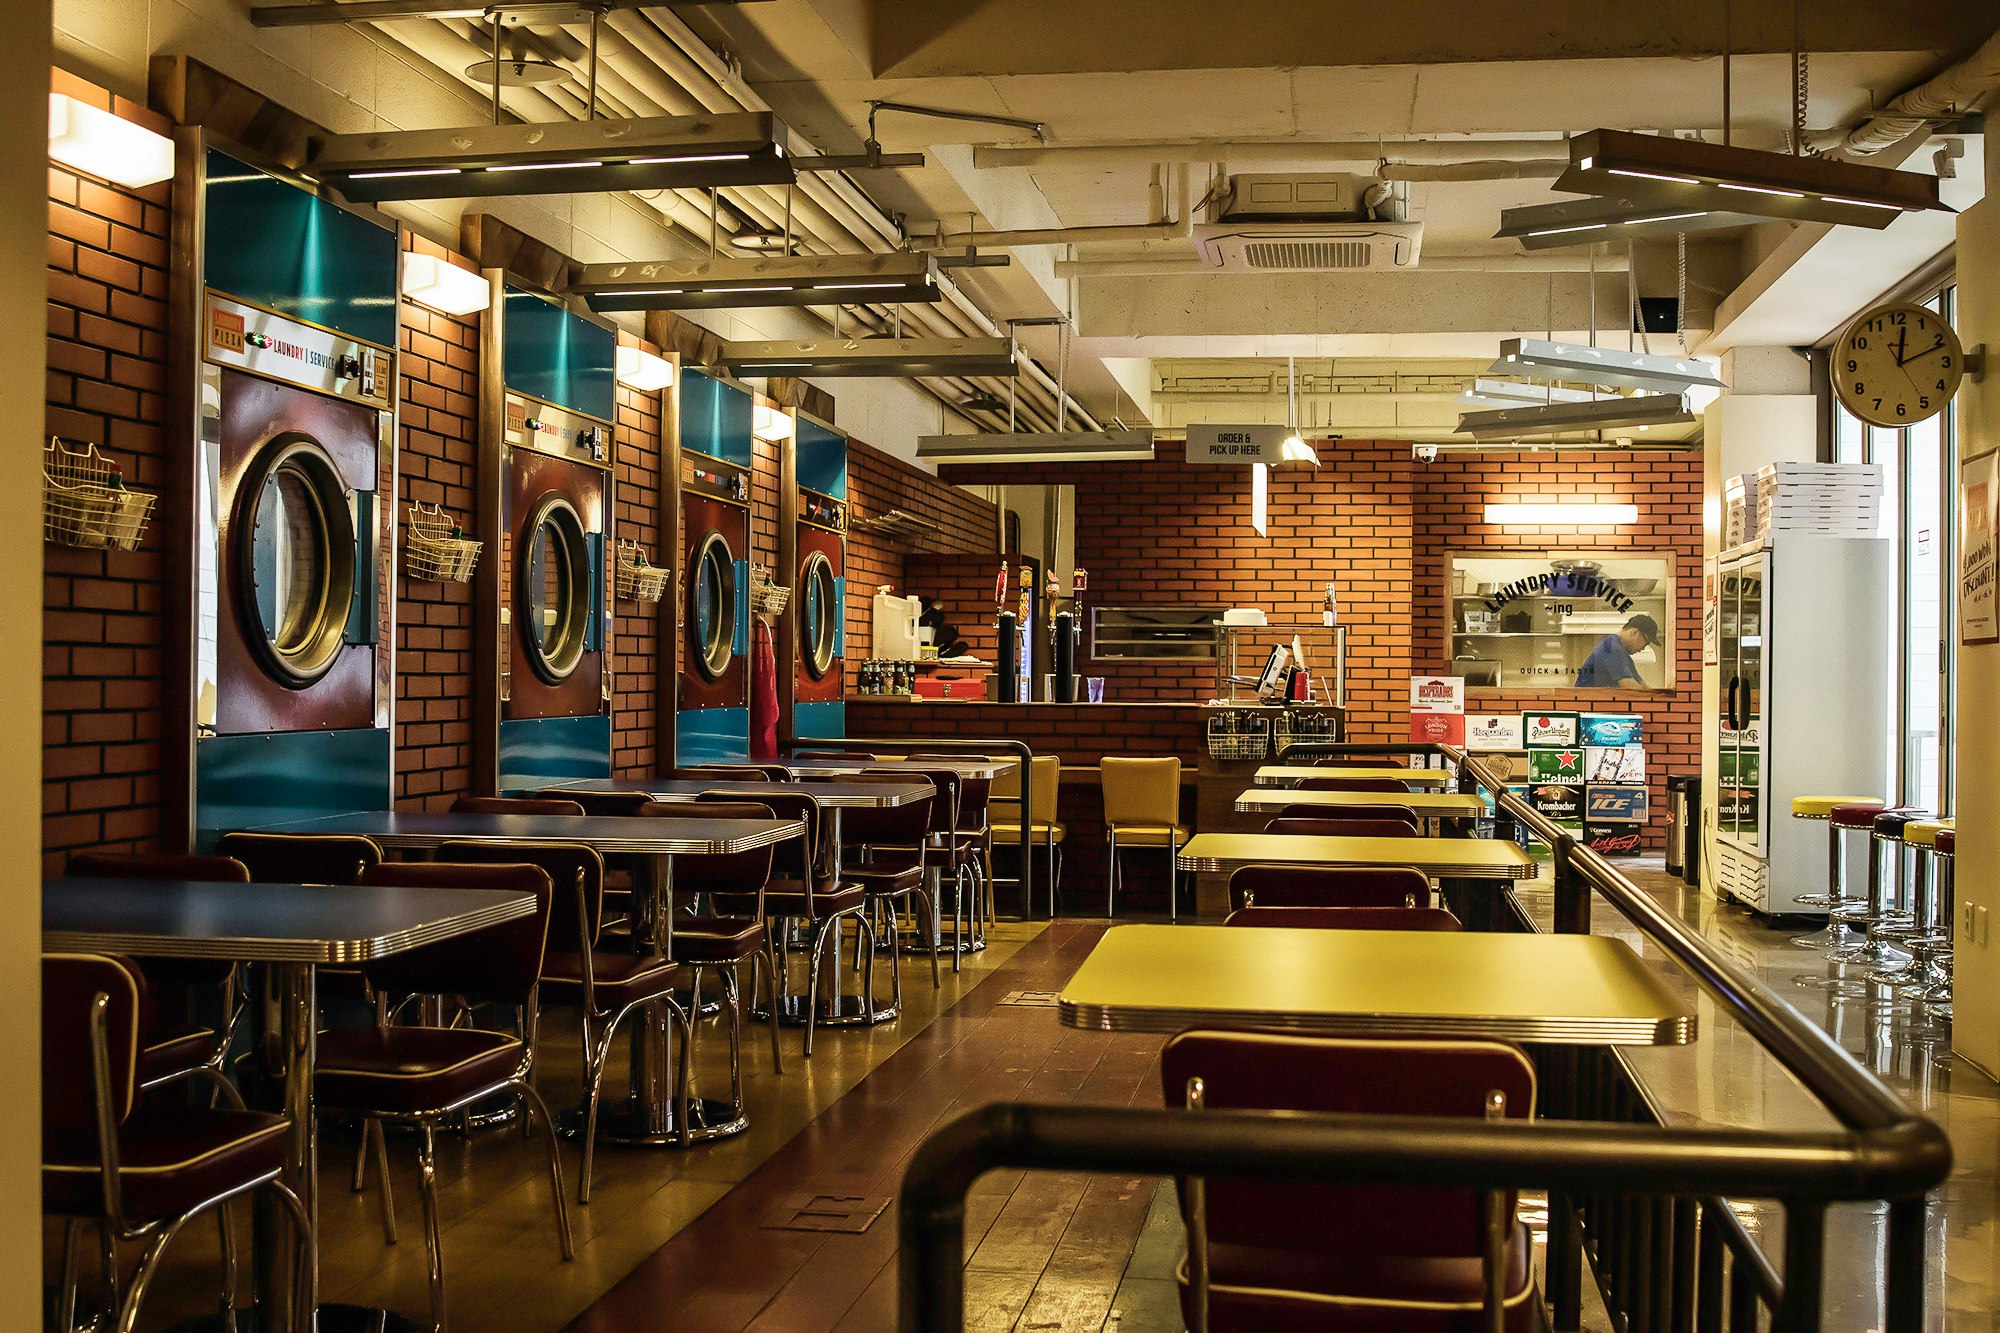 The inside of the Laundry Pizza restaurant in Gangnam, Seoul, with washing machines lining the exposed redbrick walls.